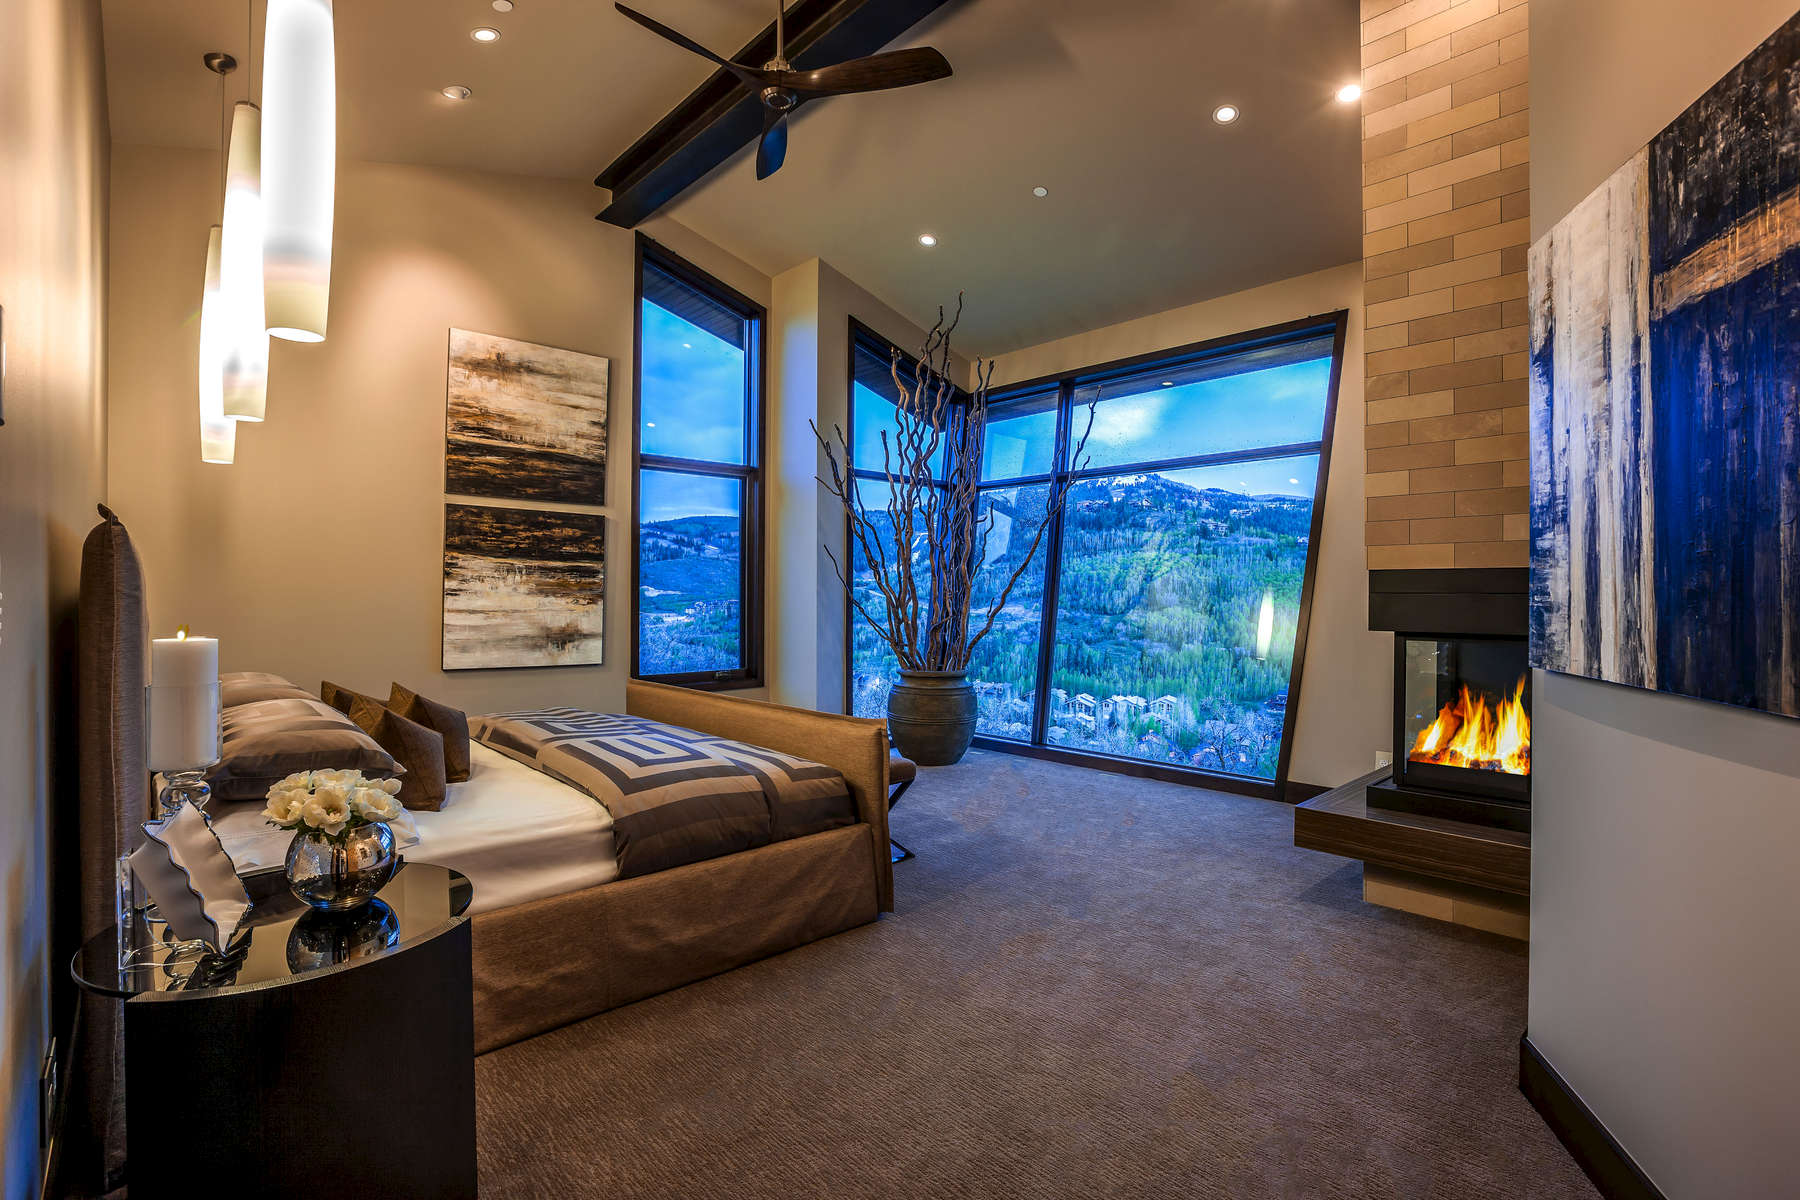 Interior bedroom with fireplace